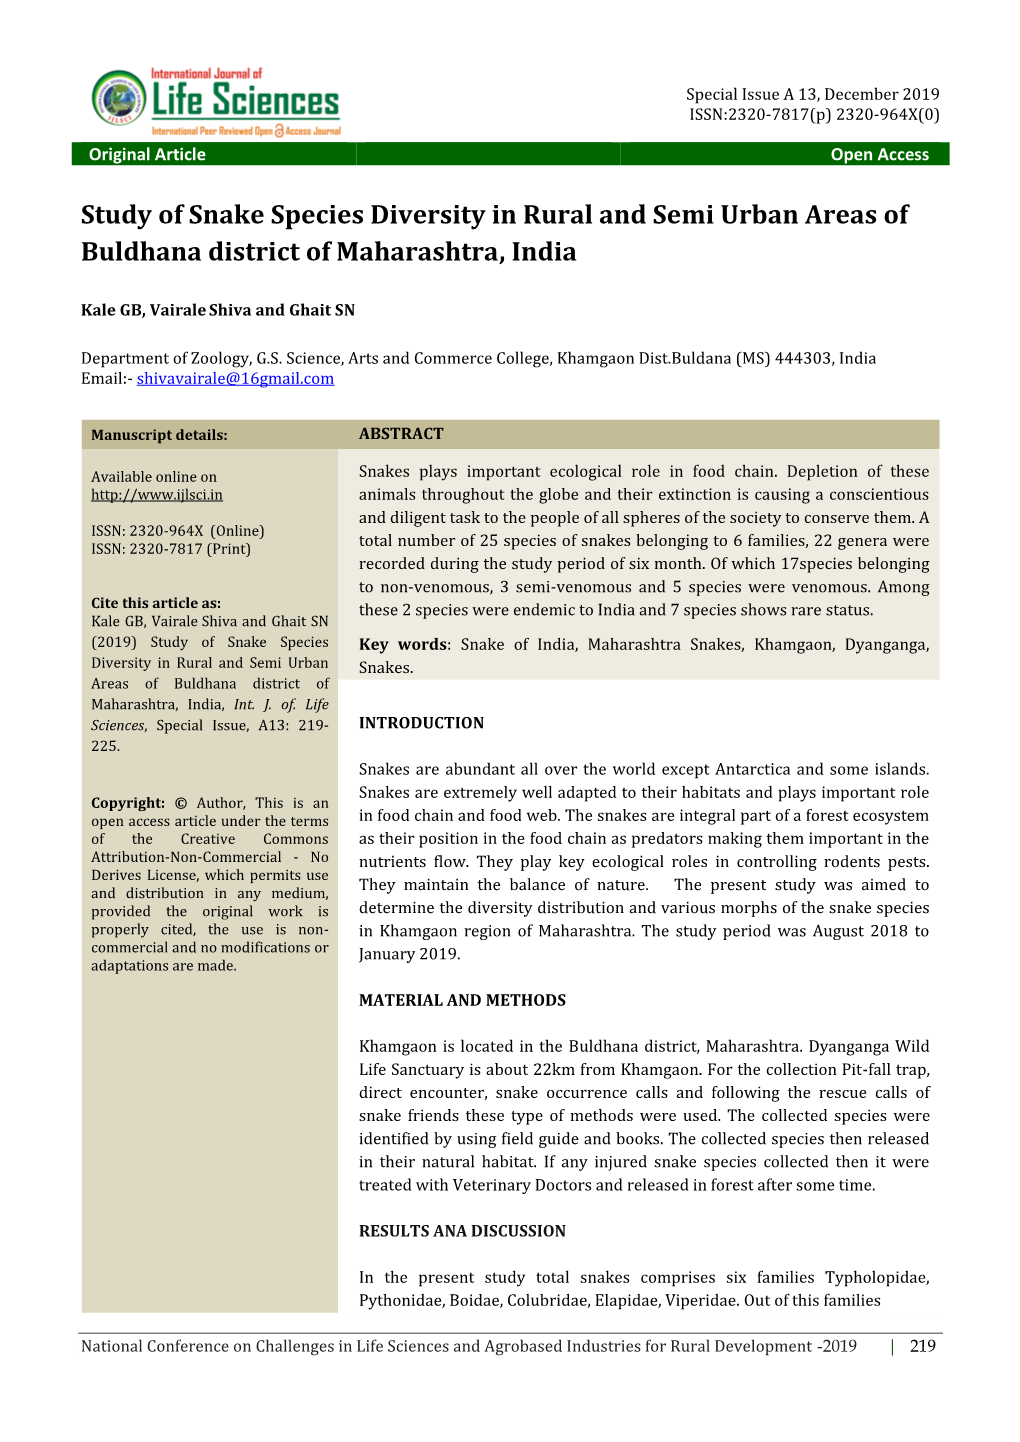 Study of Snake Species Diversity in Rural and Semi Urban Areas of Buldhana District of Maharashtra, India